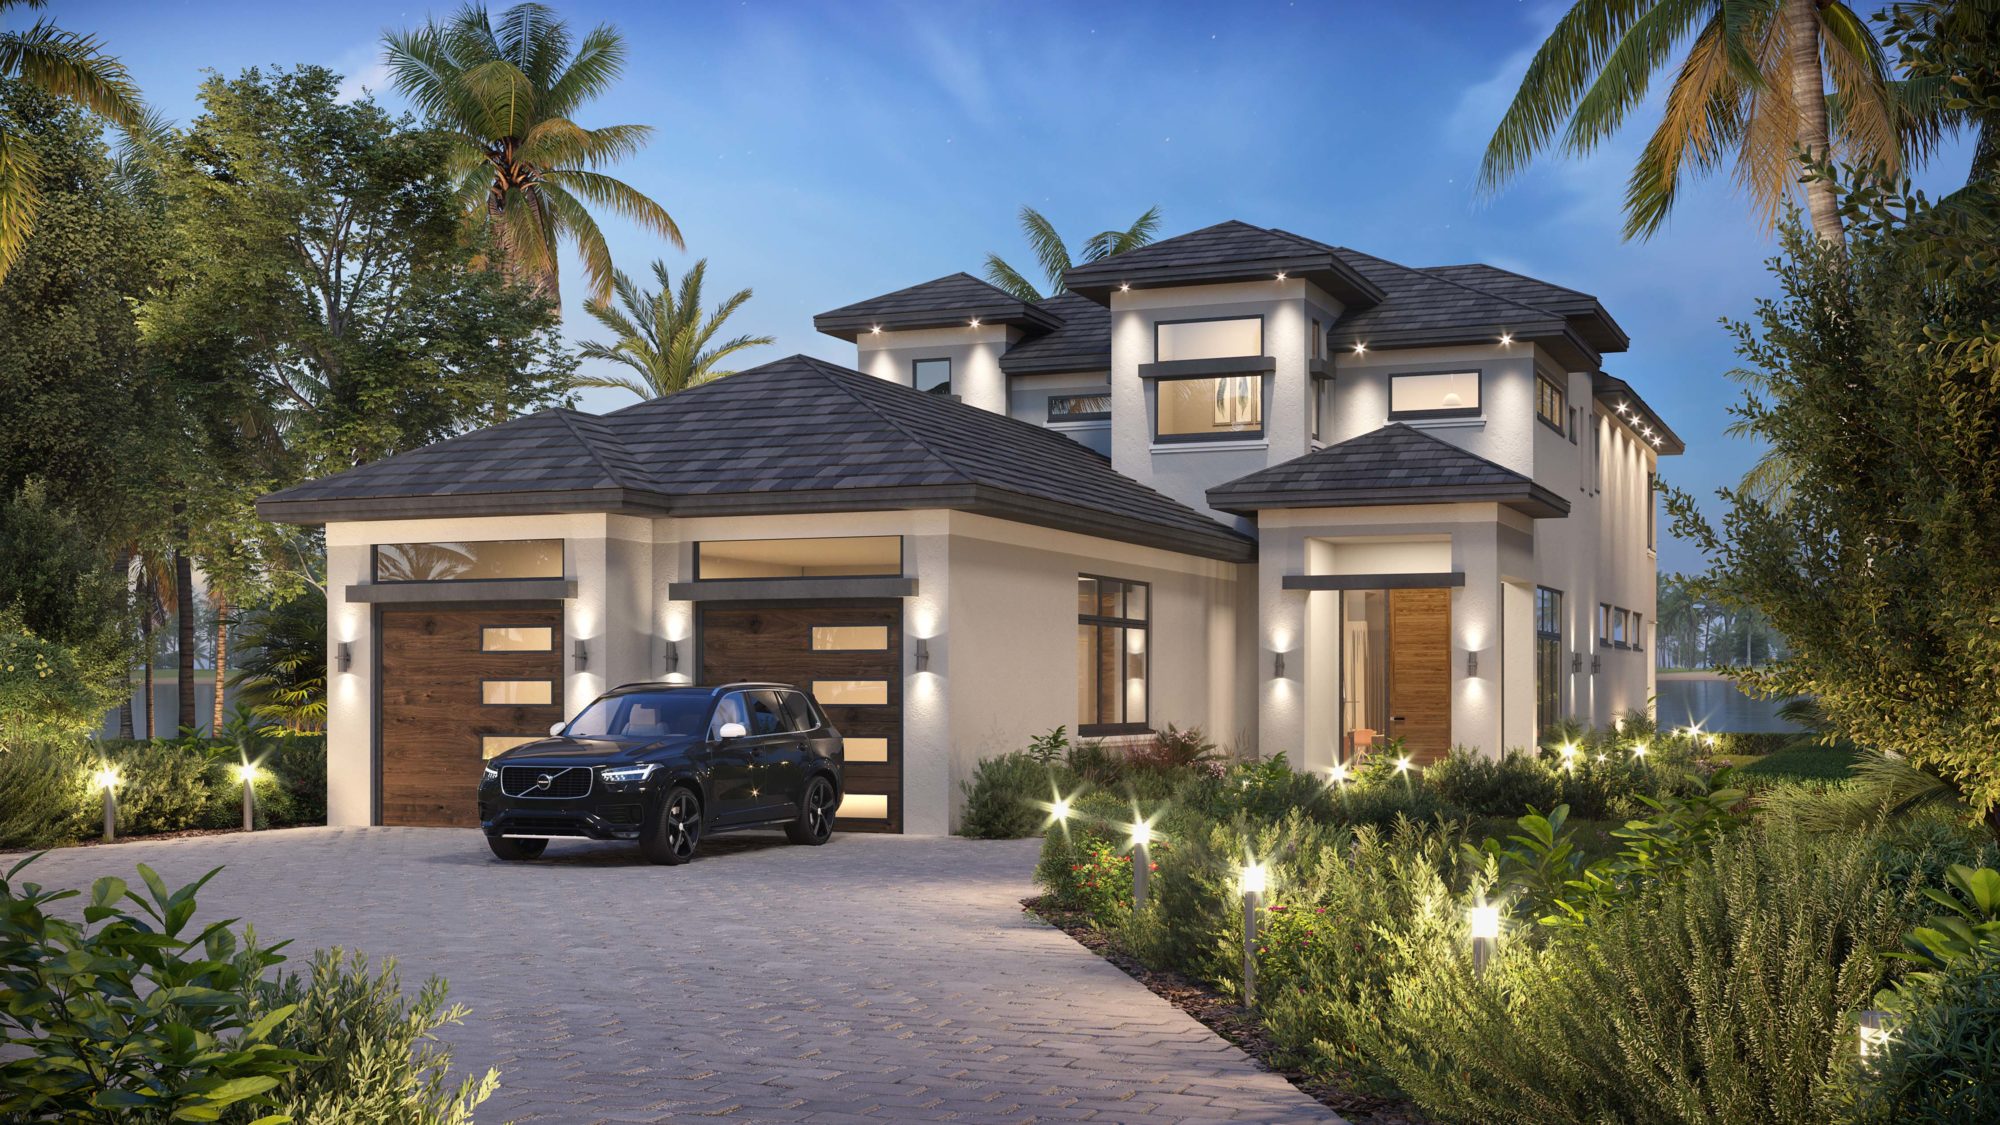 Three new luxury estate model homes planned for Isola Bella in Talis Park